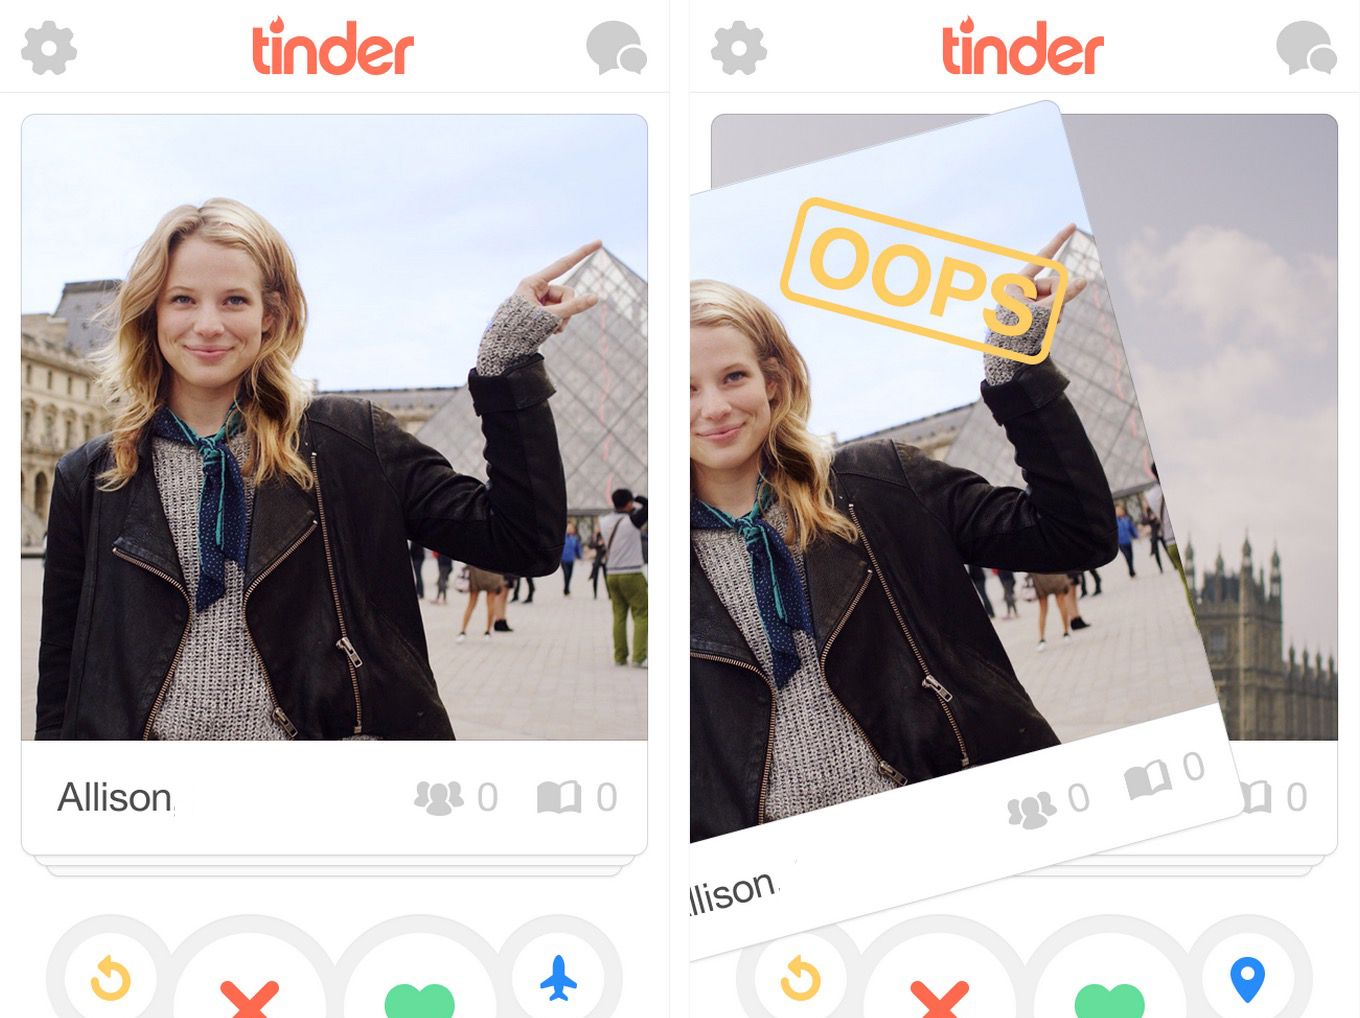 tinder s new paid tier comes with a bizarre price increase for anyone older than 27 image 1